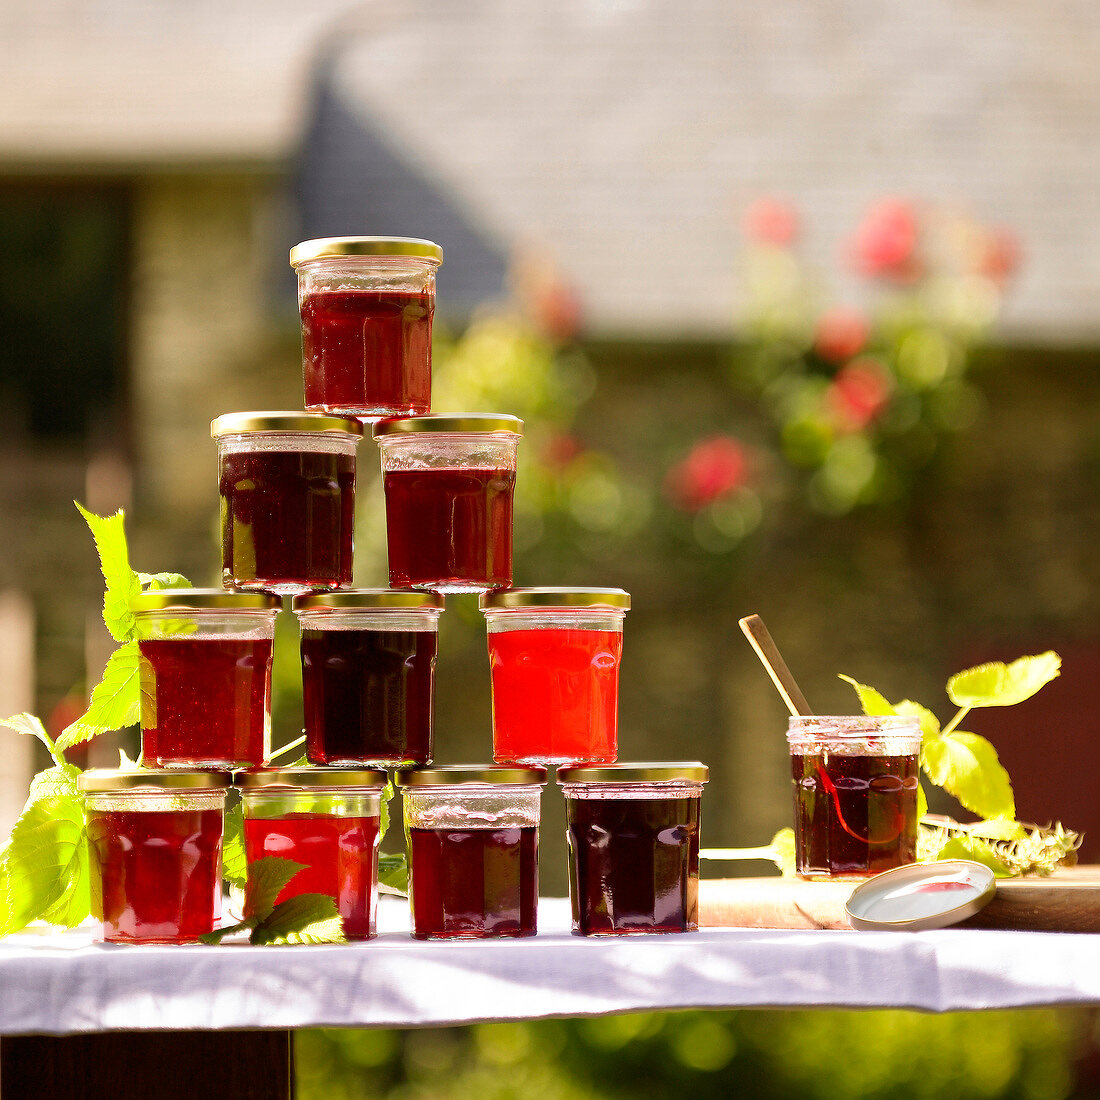 Pyramid of summer fruit jelly in jars